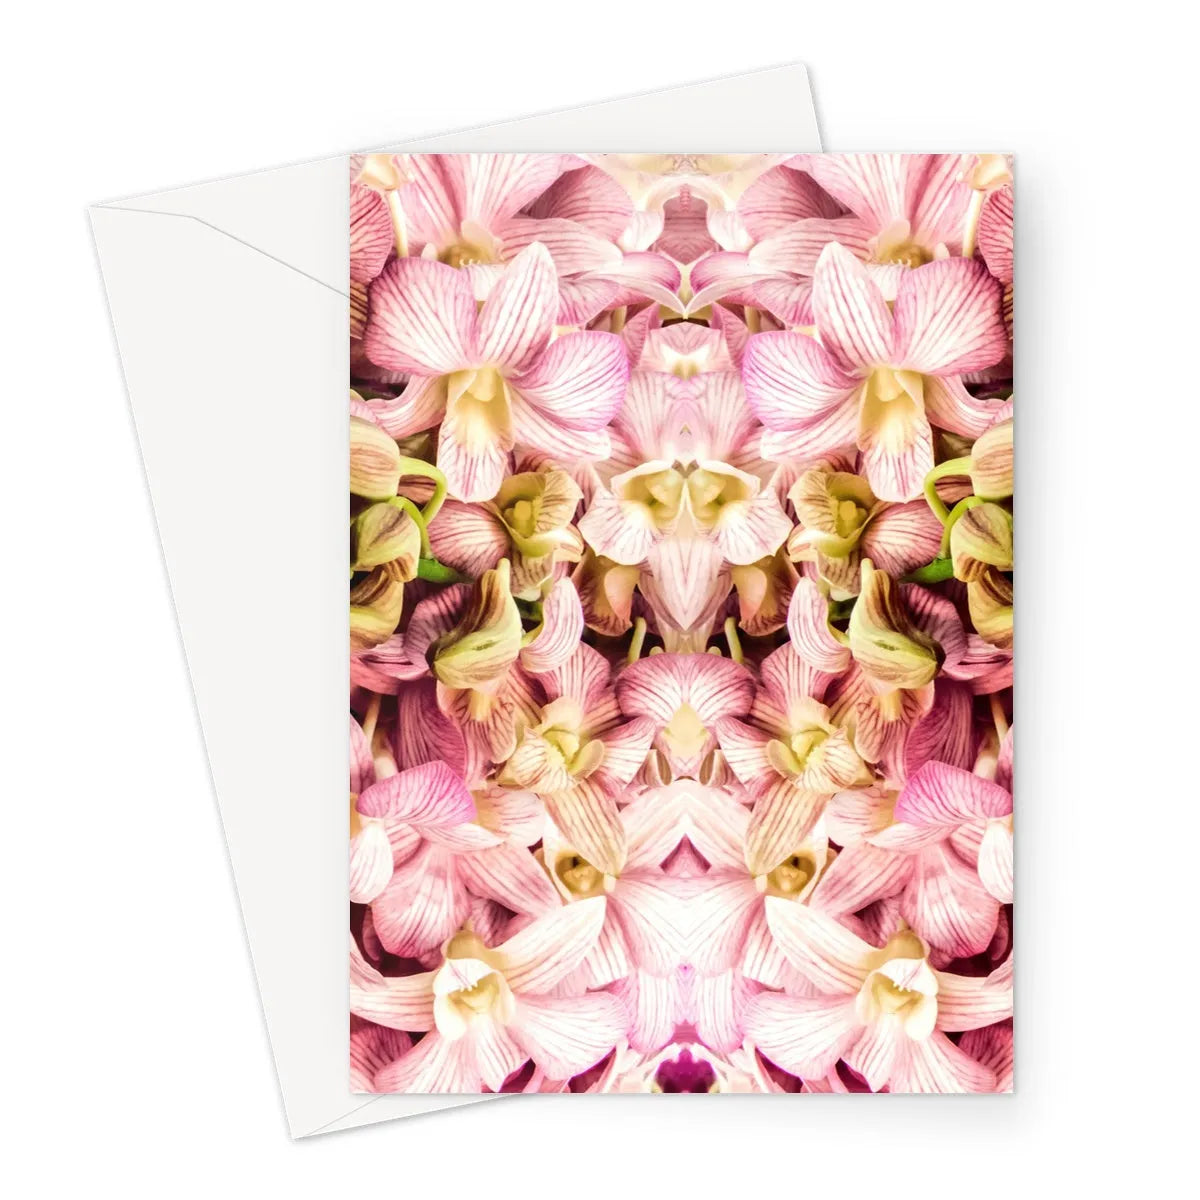 Pretty In Pink Greeting Card - A5 Portrait / 10 Cards - Greeting & Note Cards - Aesthetic Art